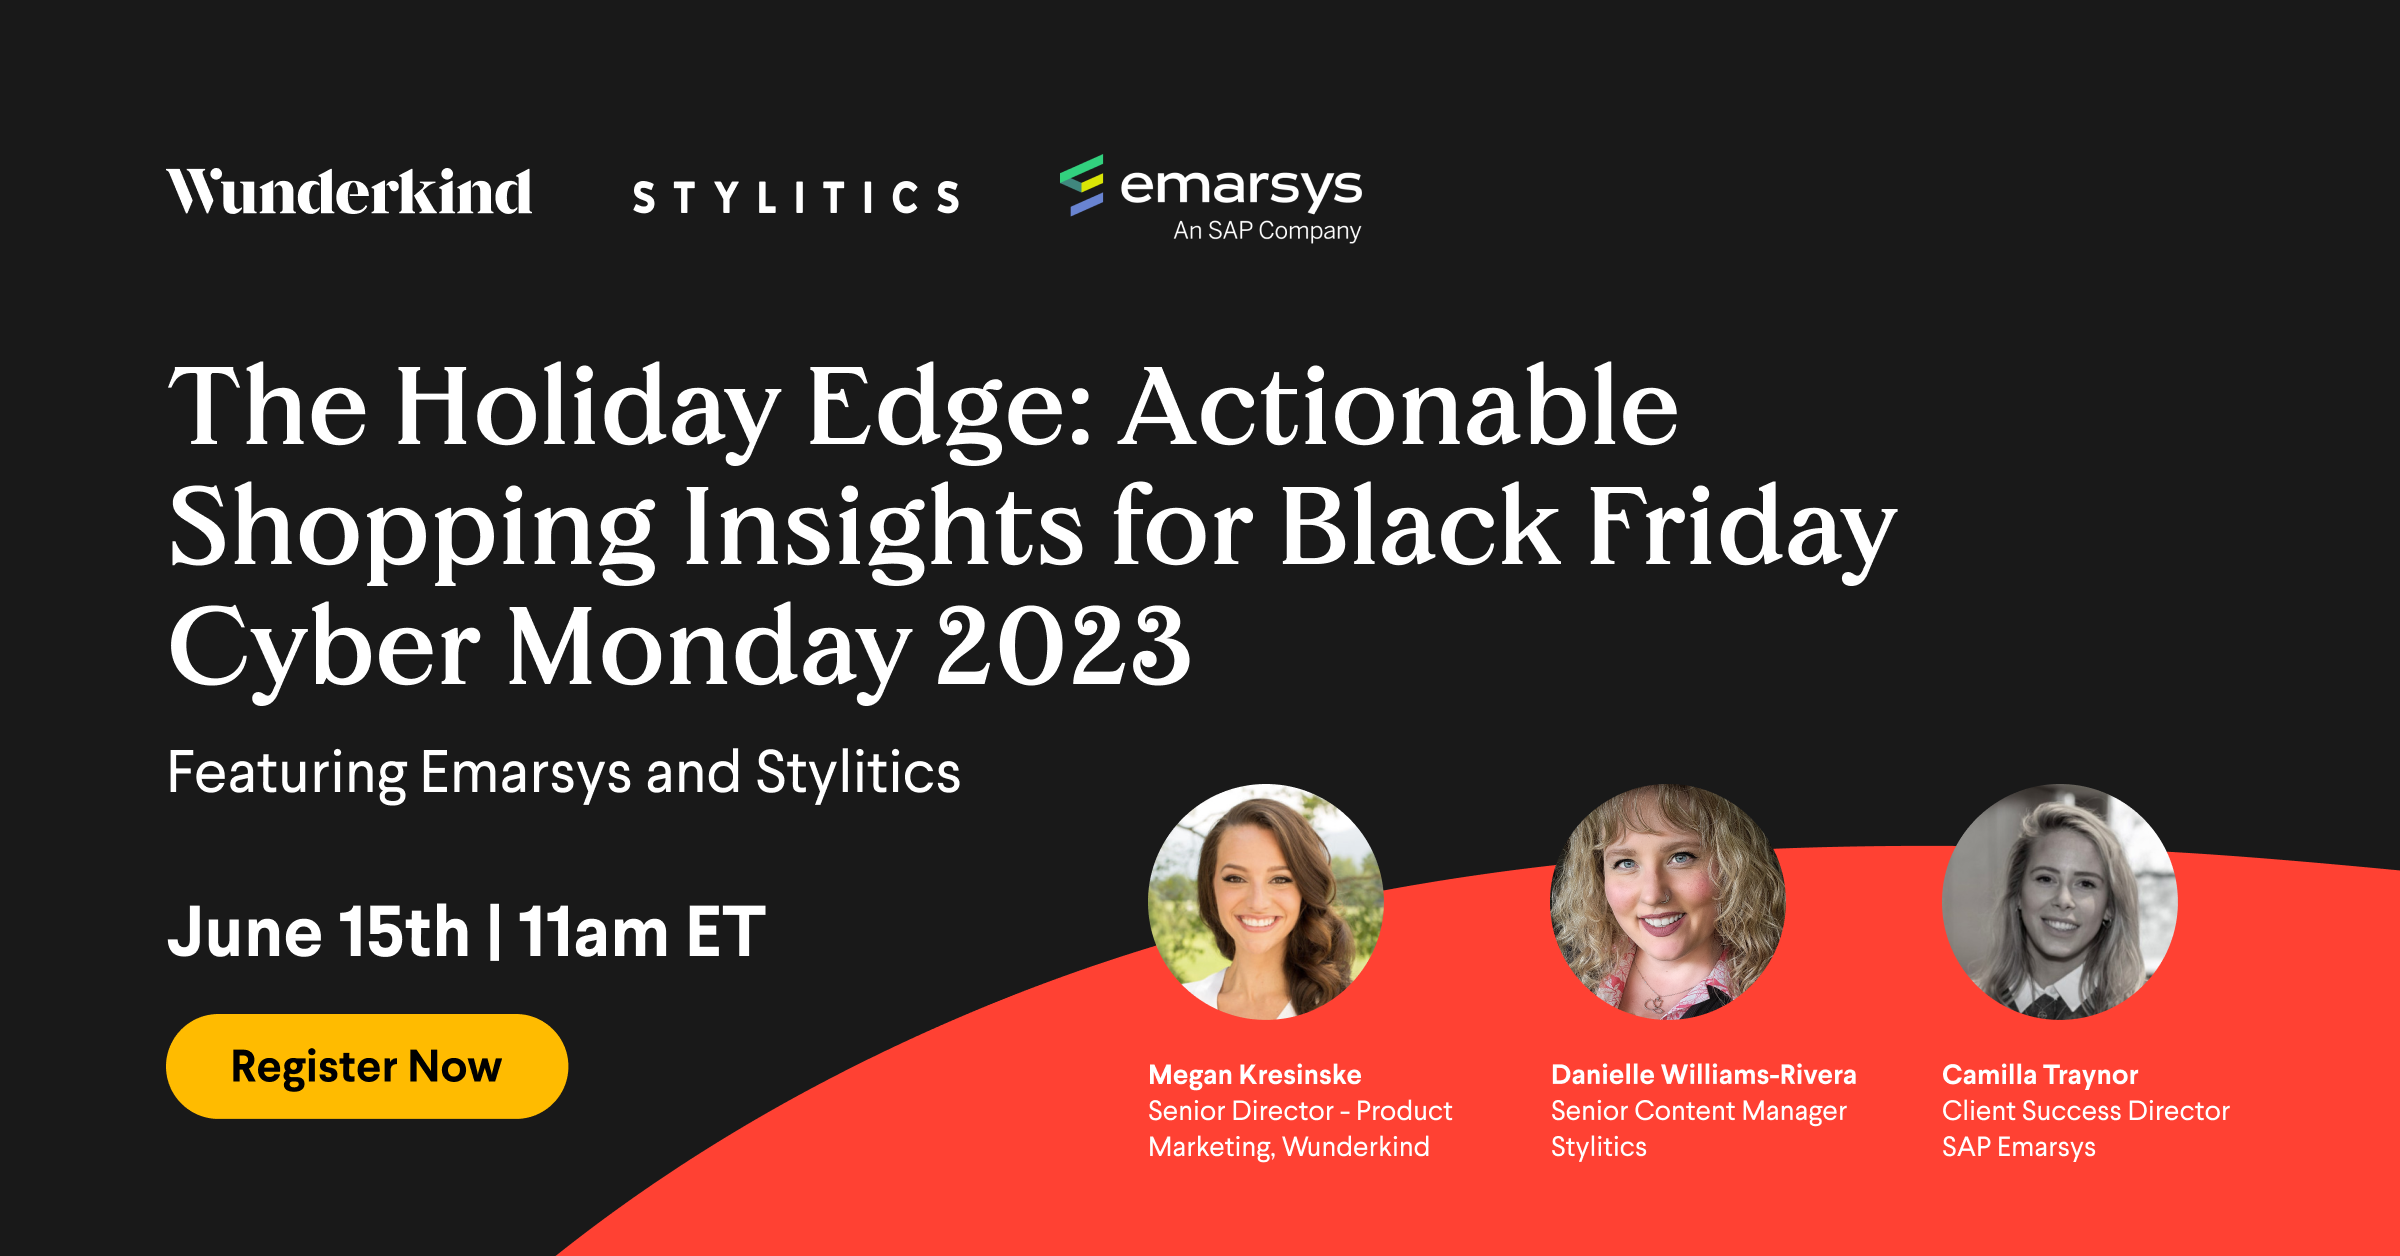 The Holiday Edge: Actionable Shopping Insights for Black Friday Cyber Monday 2023 FREE Webinar